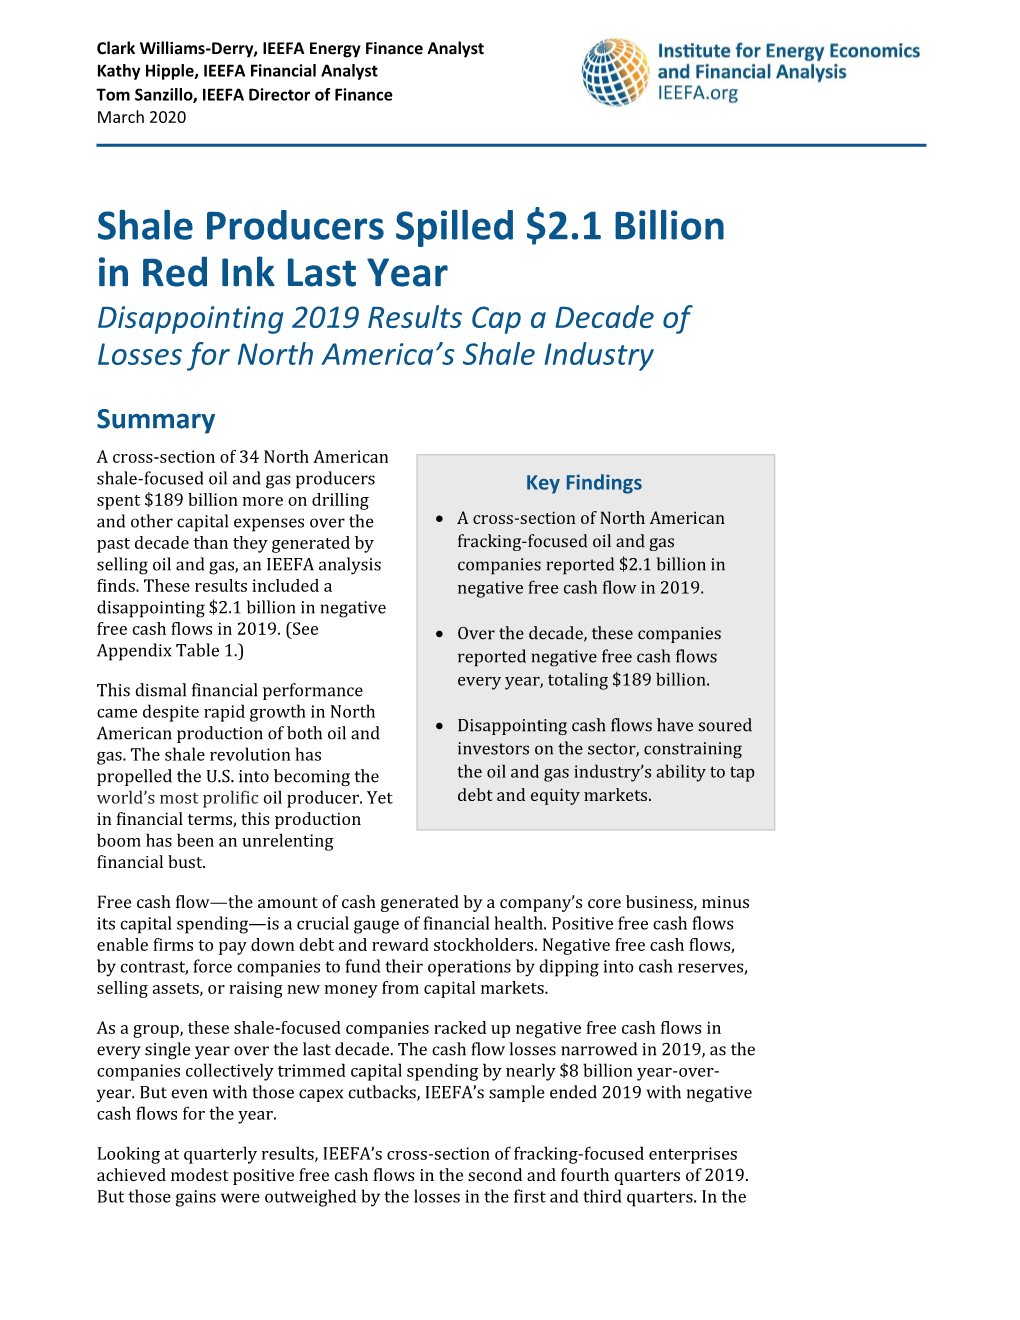 Shale Producers Spilled $2.1 Billion in Red Ink Last Year Disappointing 2019 Results Cap a Decade of Losses for North America’S Shale Industry